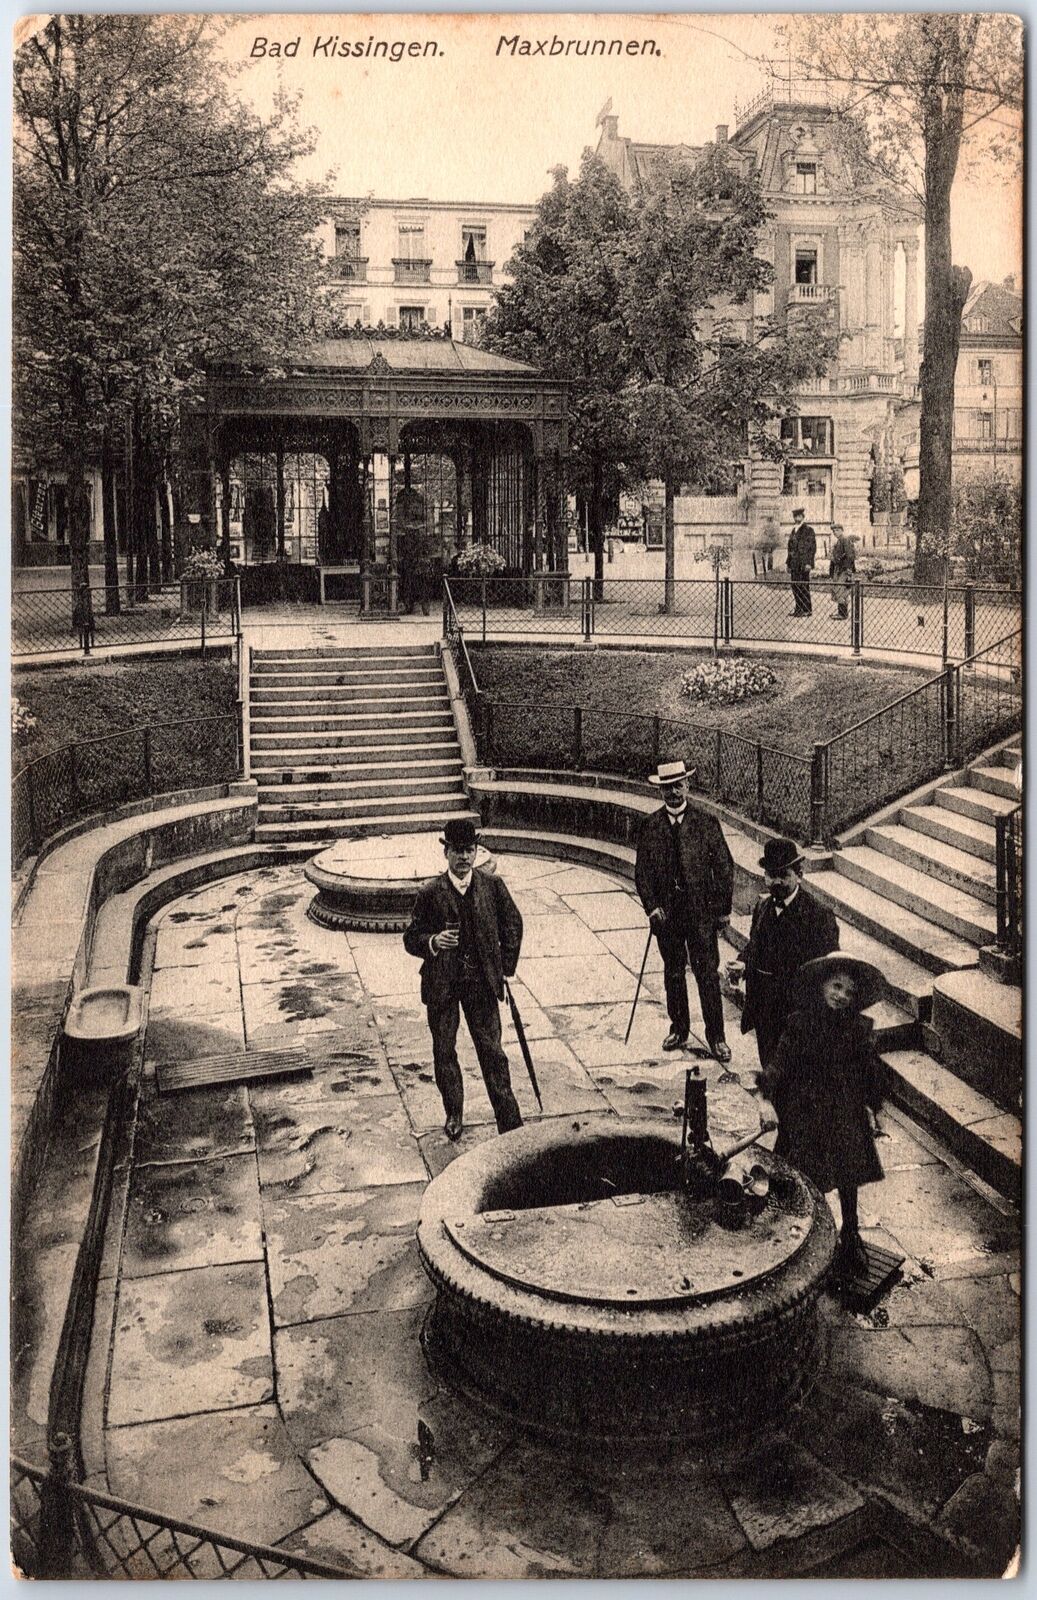 VINTAGE POSTCARD VISITORS AT MAX FOUNTAIN SQUARE IN BAD KISSINGEN GERMANY c.1910